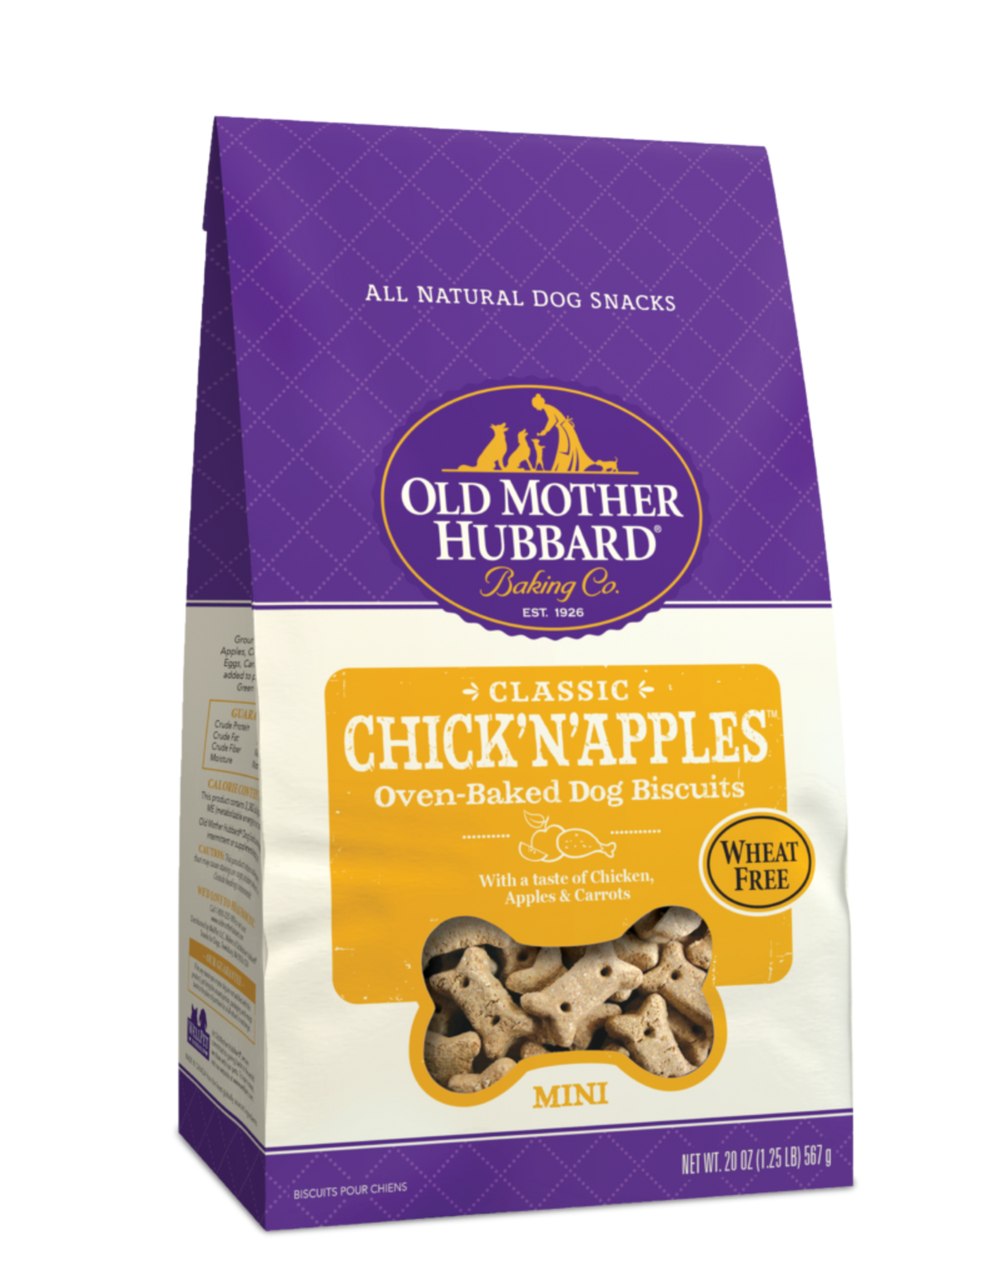 OMH Classic Mini Chick'n'Apples Biscuits